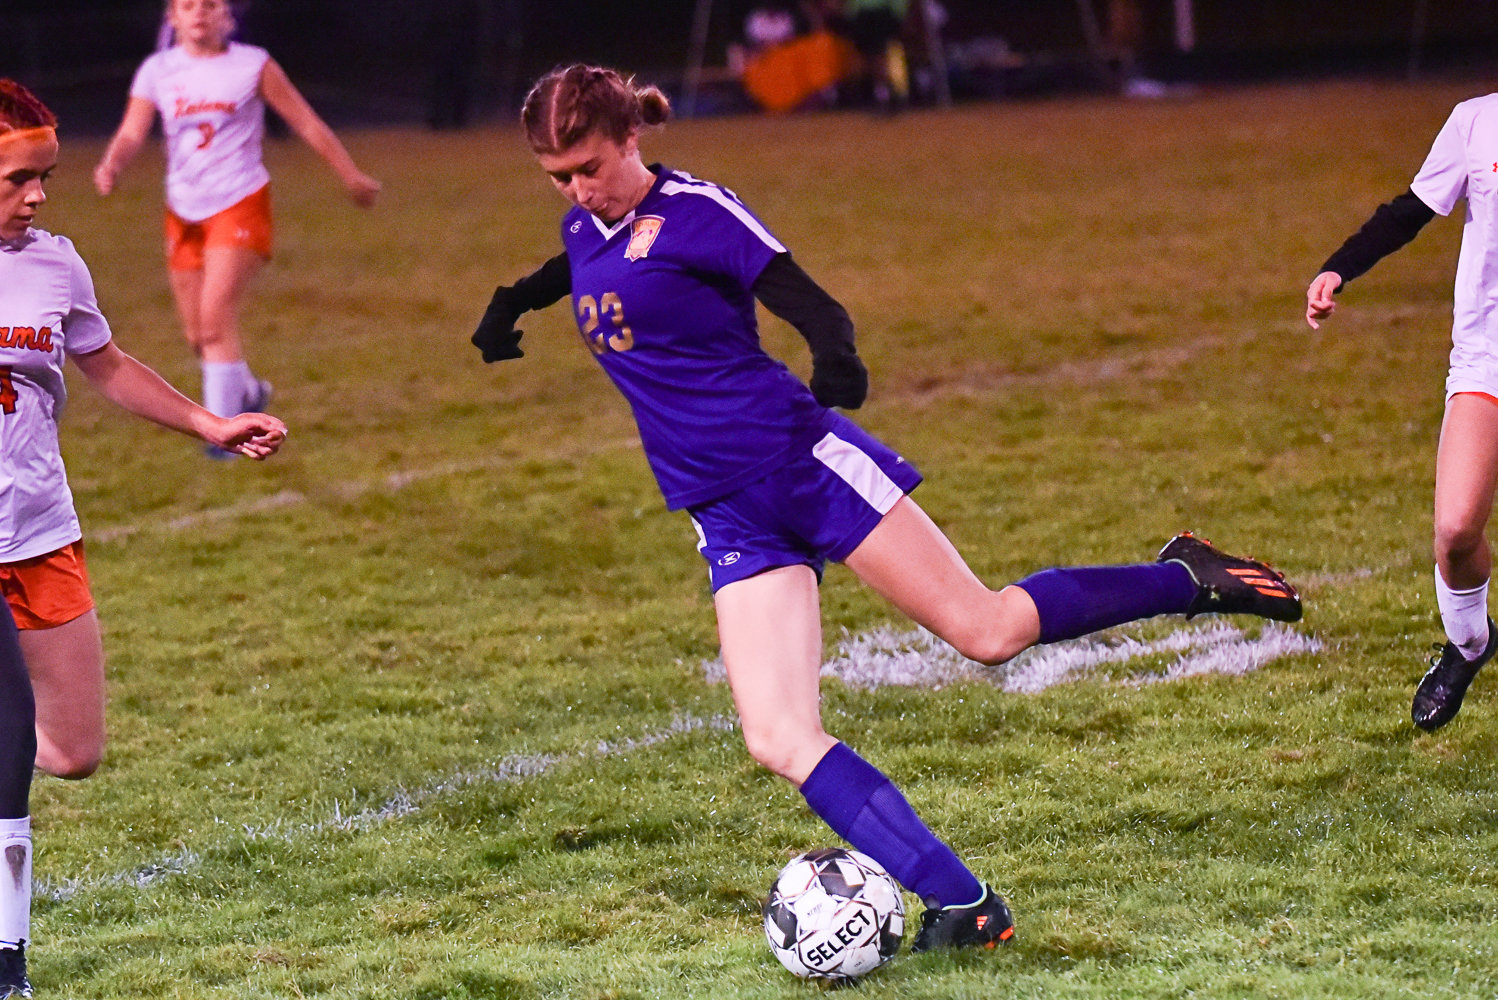 Sylvie Little tries to take on a defender during Onalaska's match against Kalama on Oct. 26.